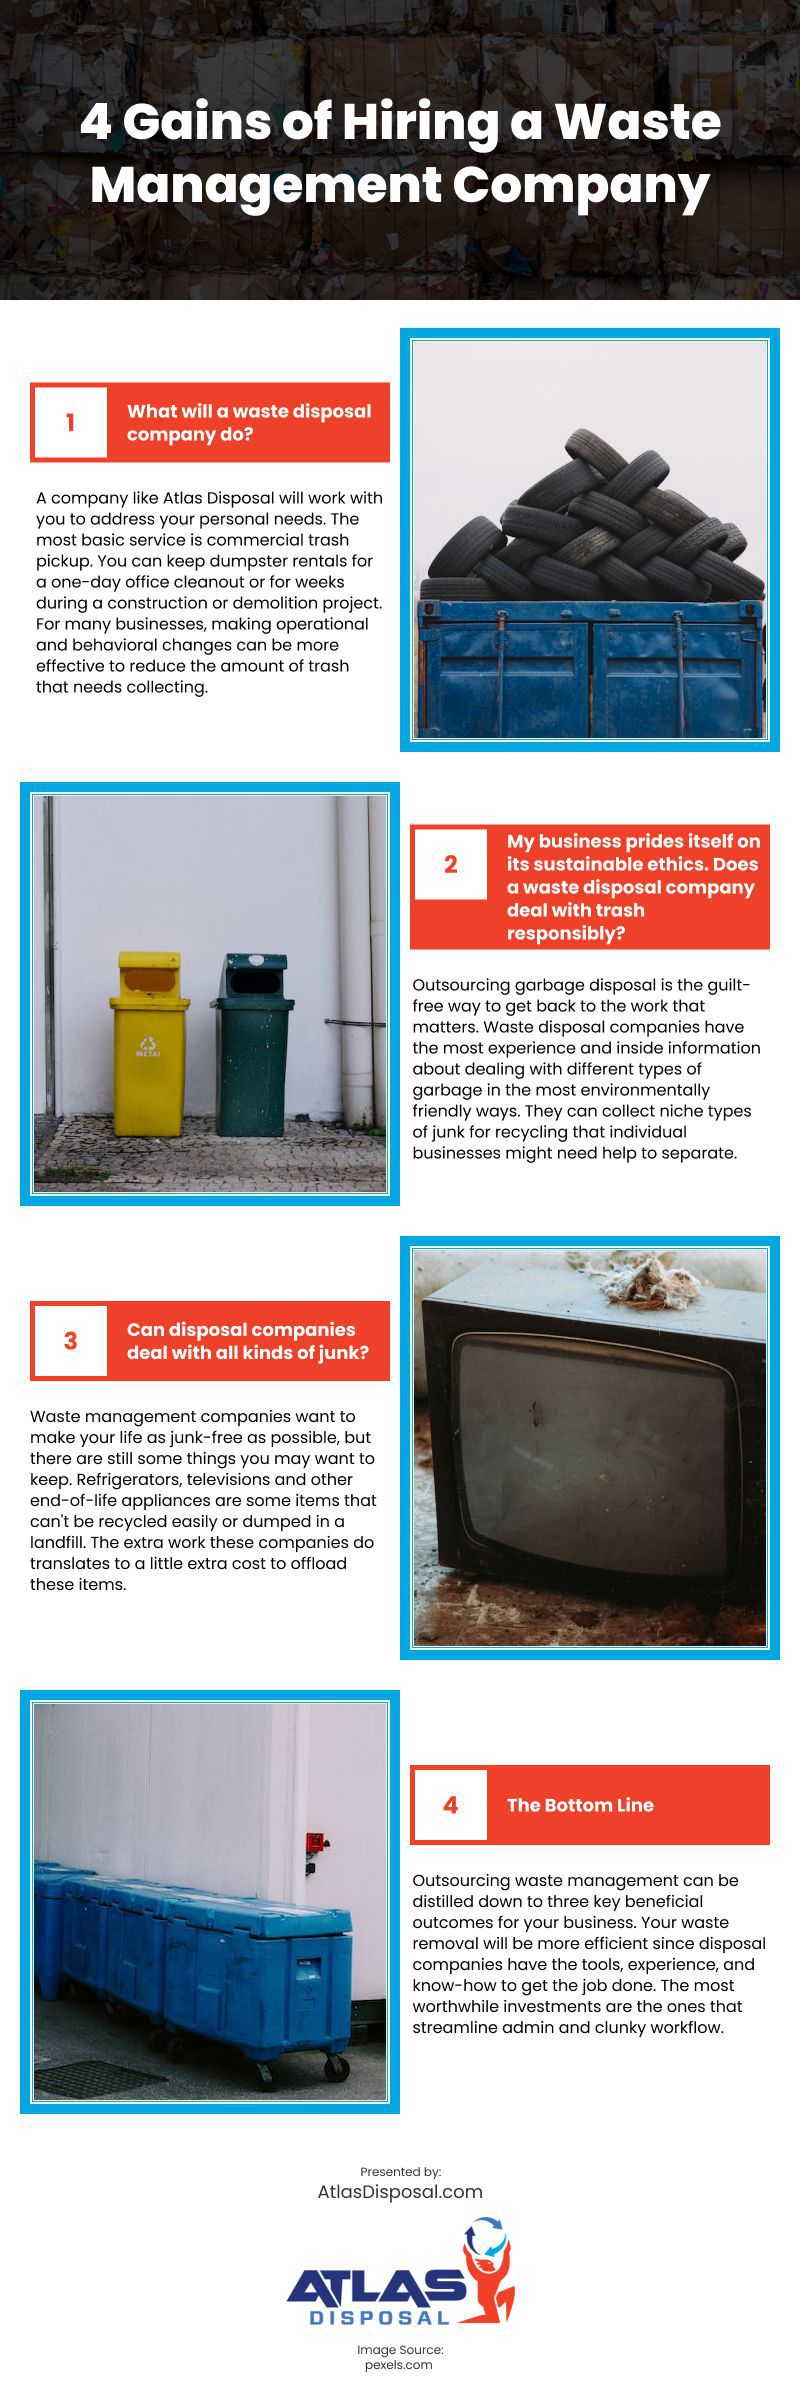 4 Gains of Hiring a Waste Management Company Infographic